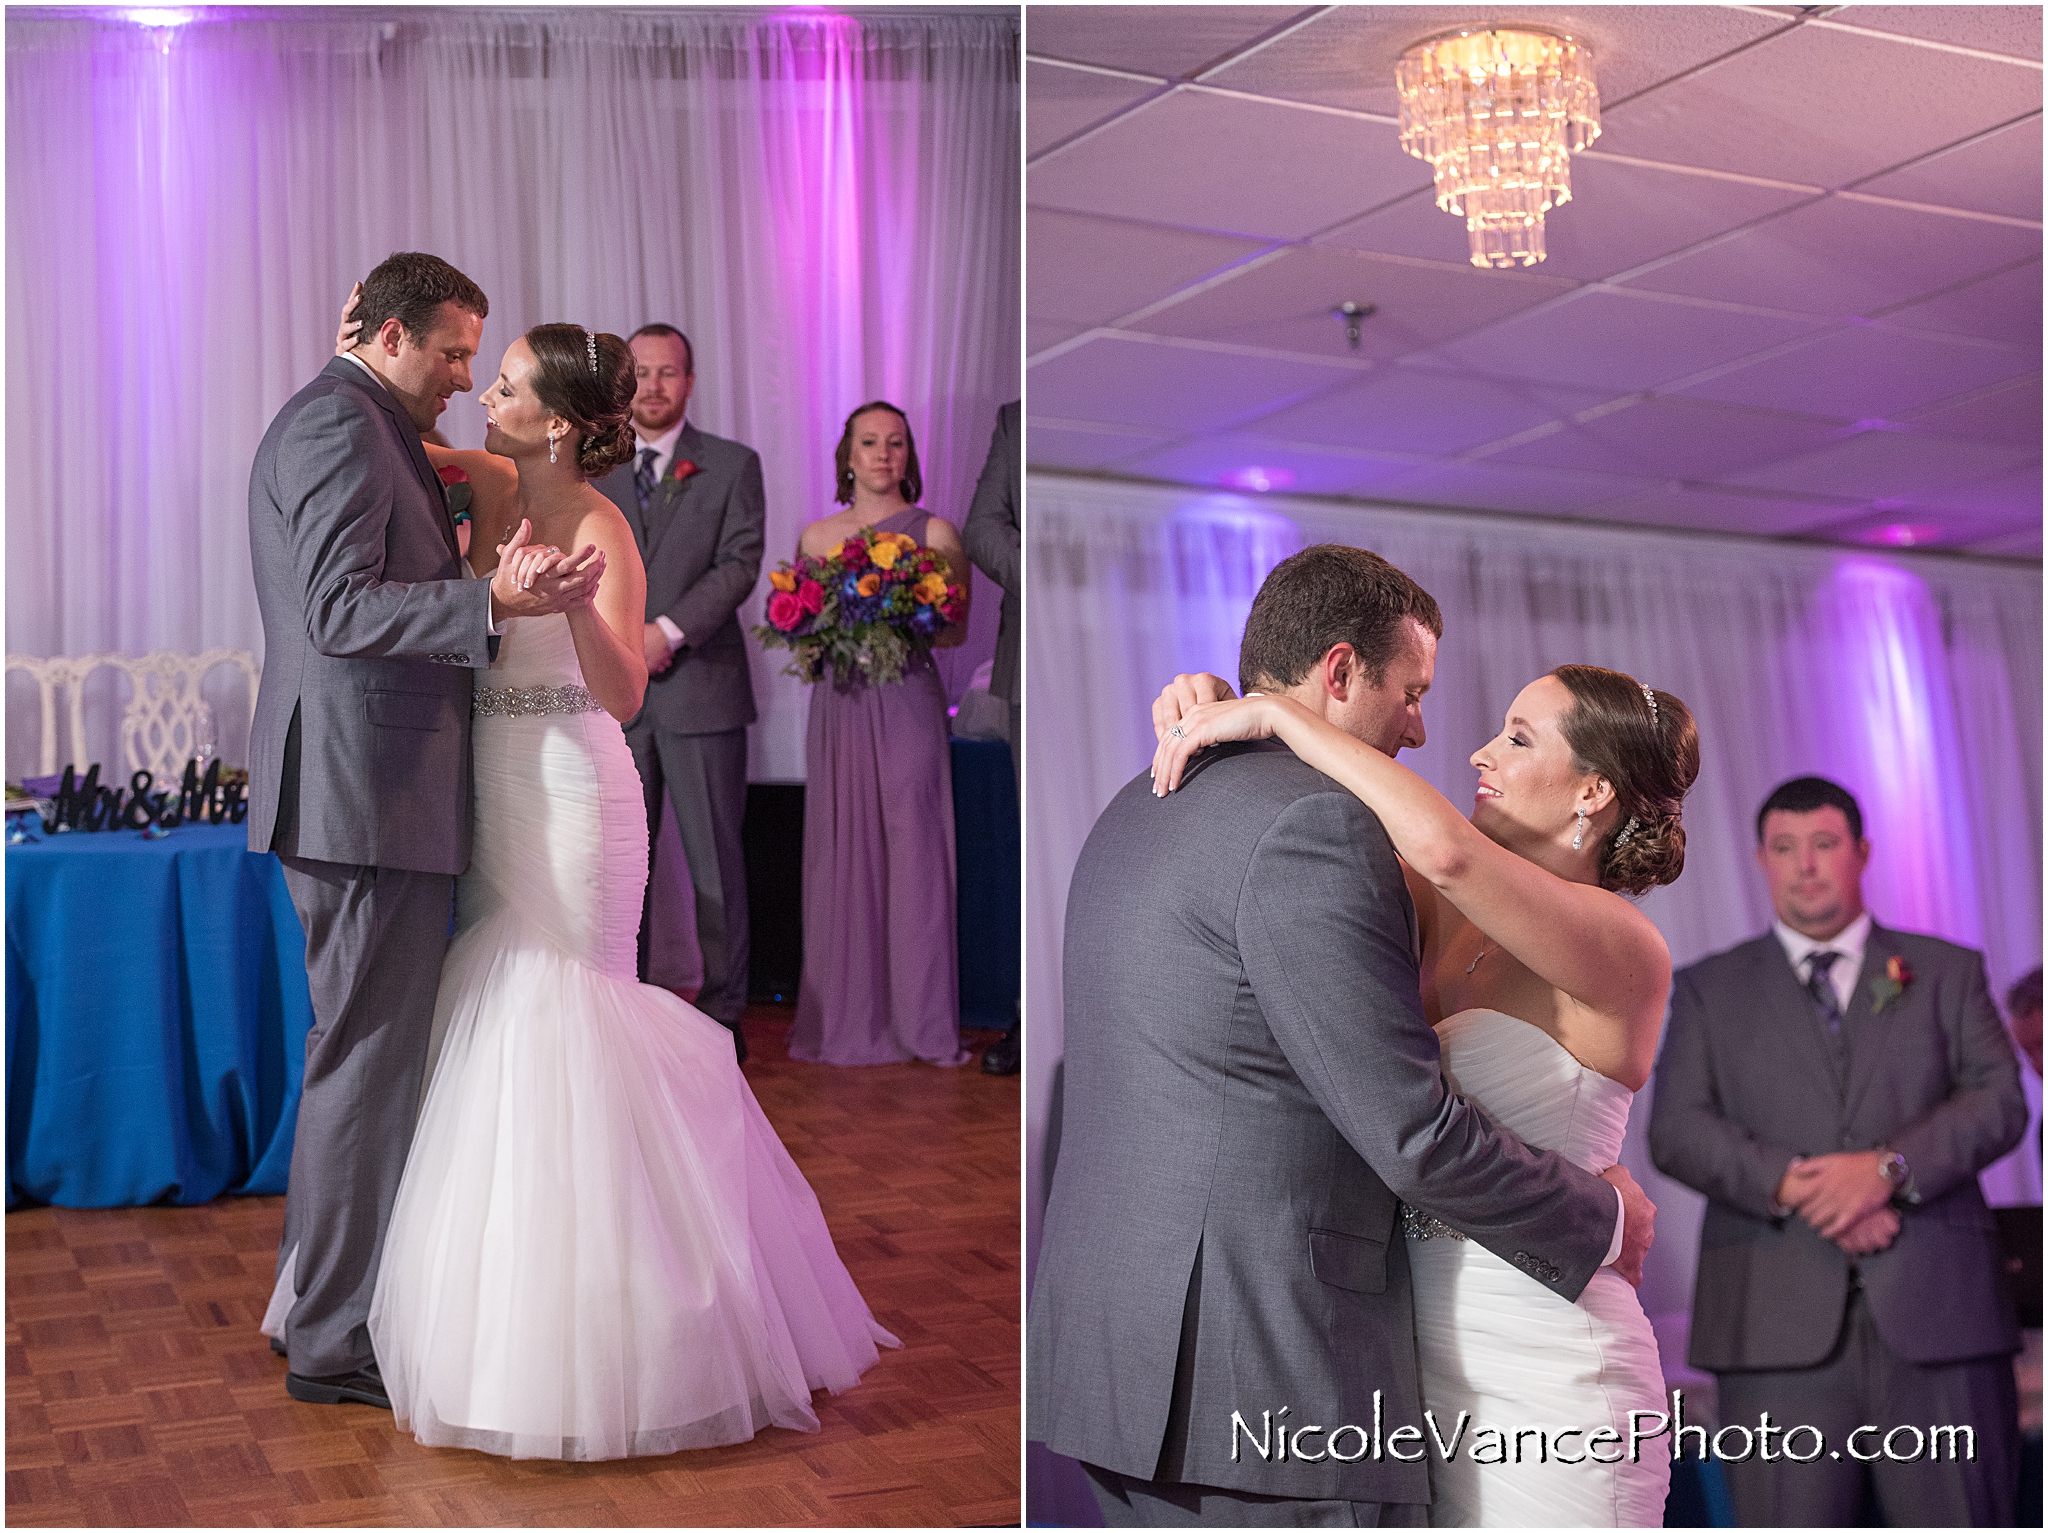 The bride and groom enjoy their first dance at their wedding reception at The Brownstone.